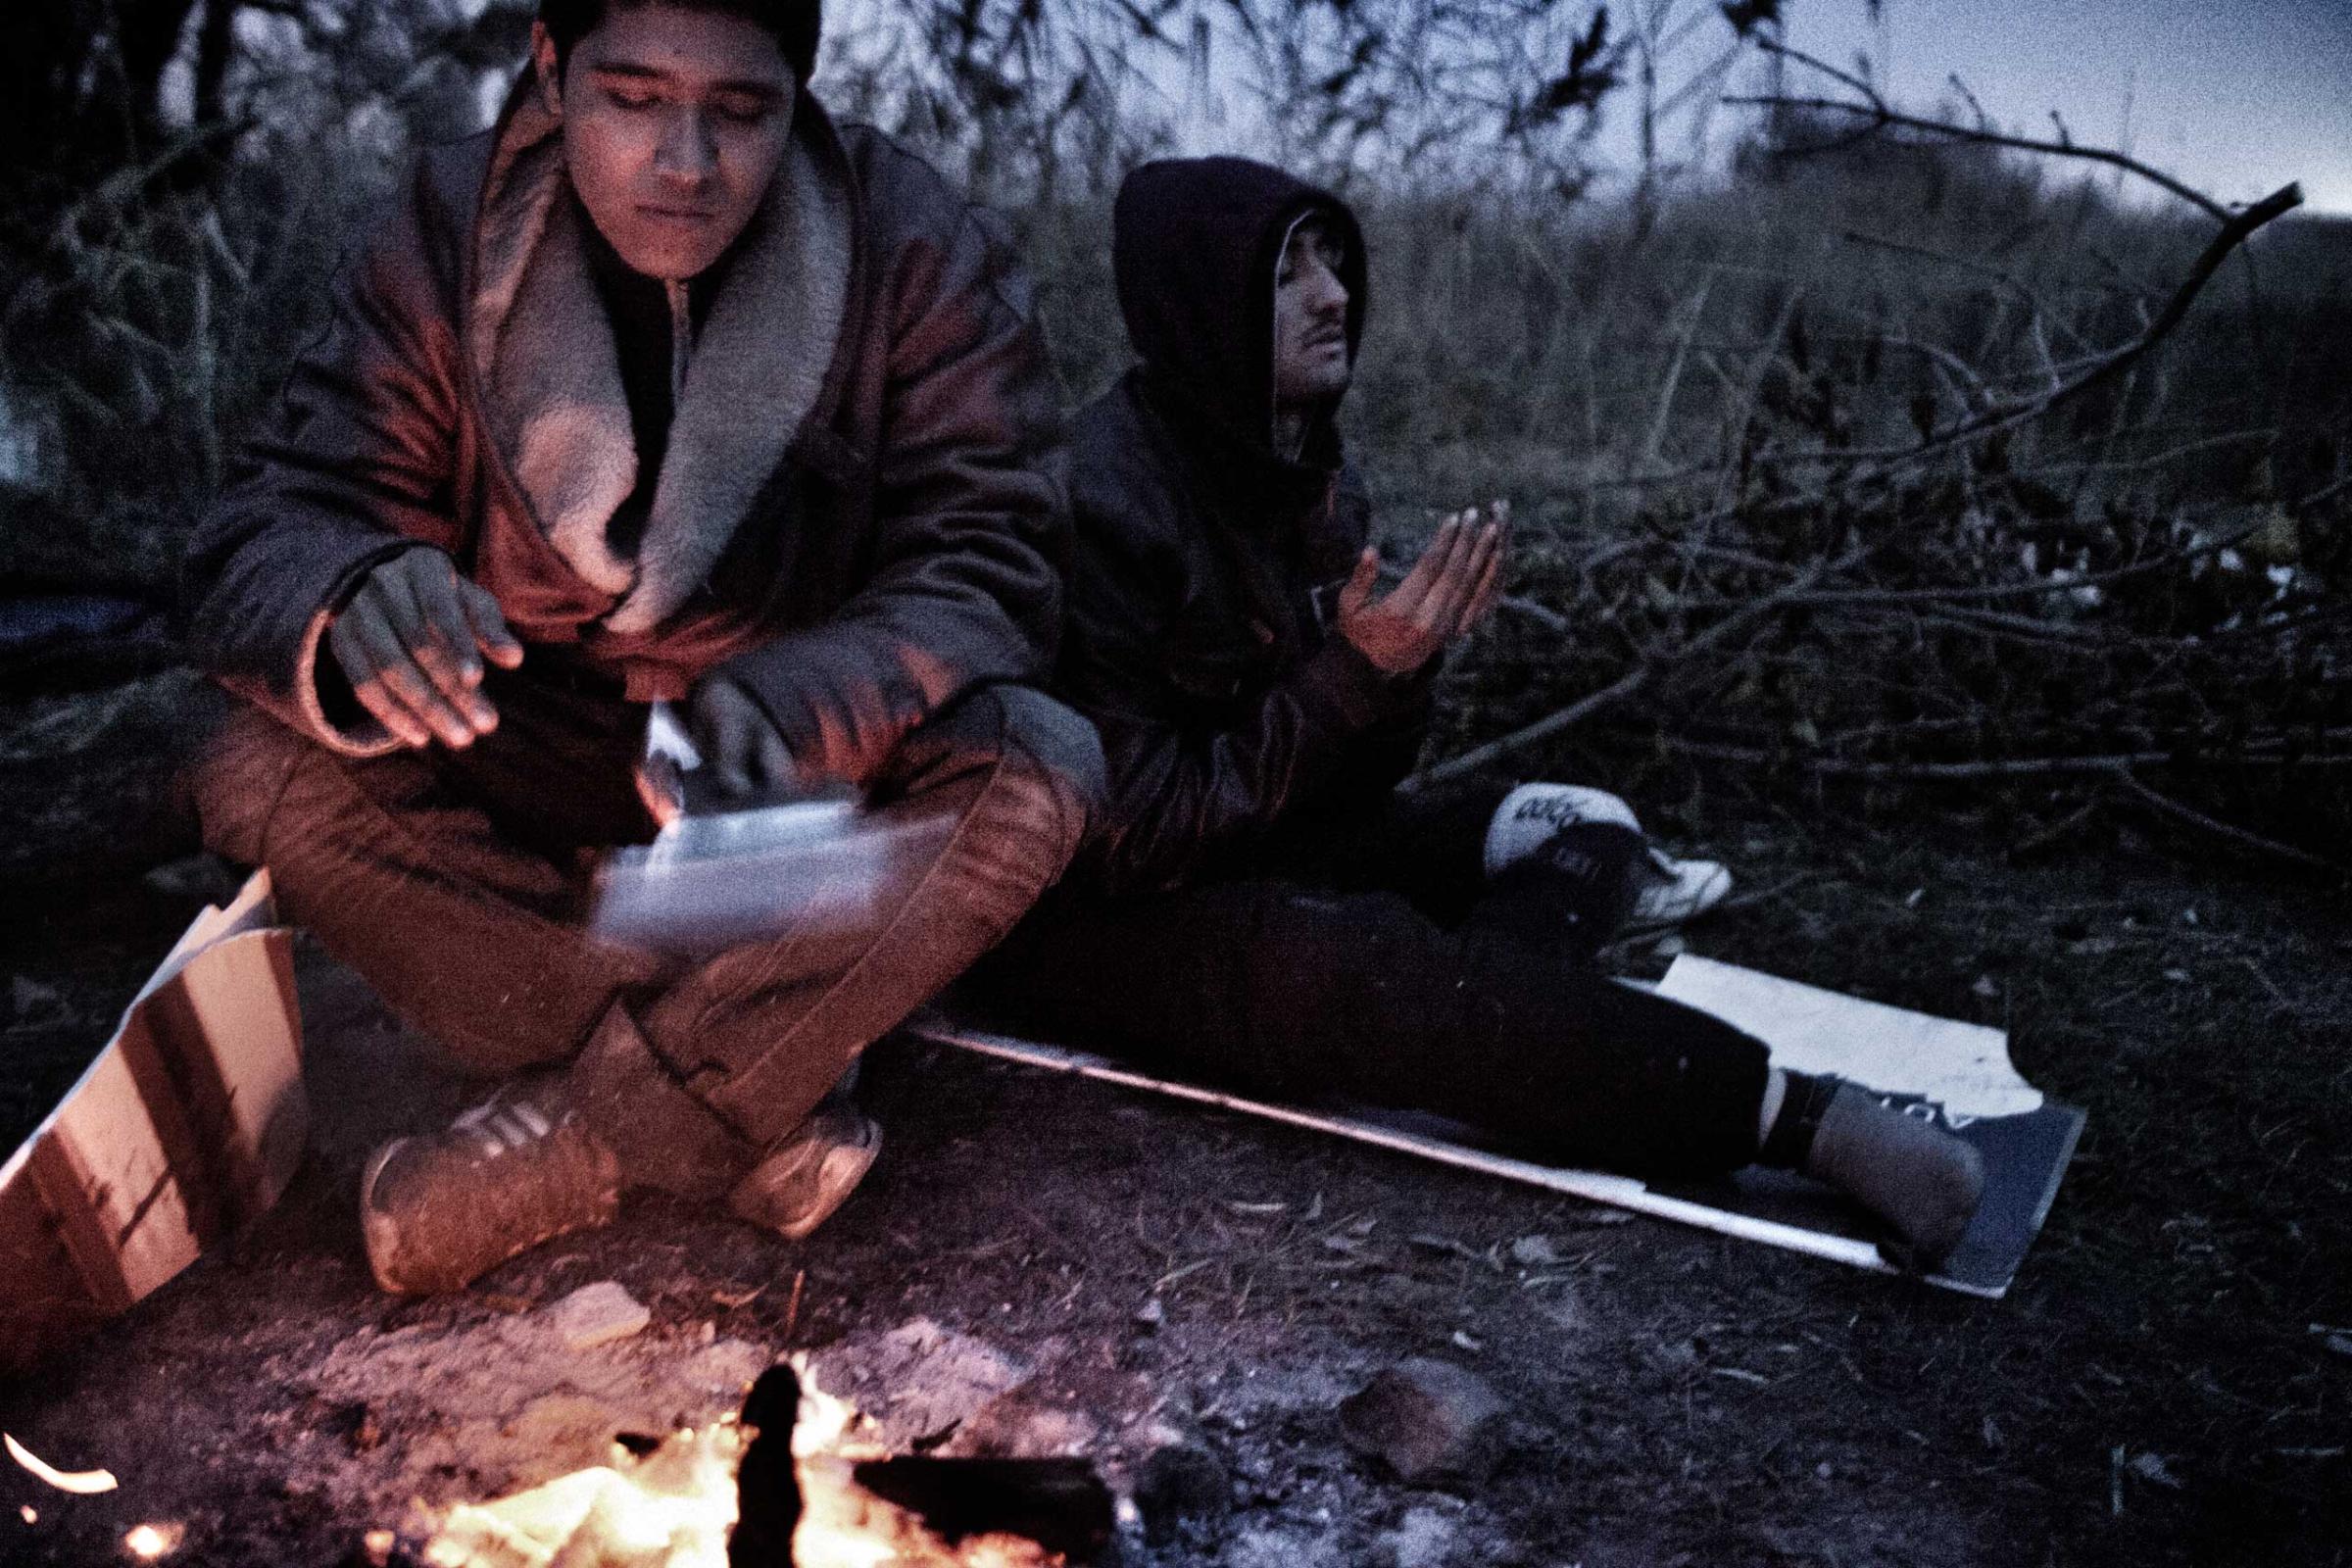 Afghan refugees, Kabir and Zaher, sit by a fire in Subotica, Serbia on Nov. 10, 2012. Zaher, who lost his left leg below the knees, made it to Serbia on crutches. Zaher says he is 16 and Kabir 15. The two were traveling together from Greece. The men they lived outdoors in Subotica, waiting for smugglers to give the green light to continue their journey.